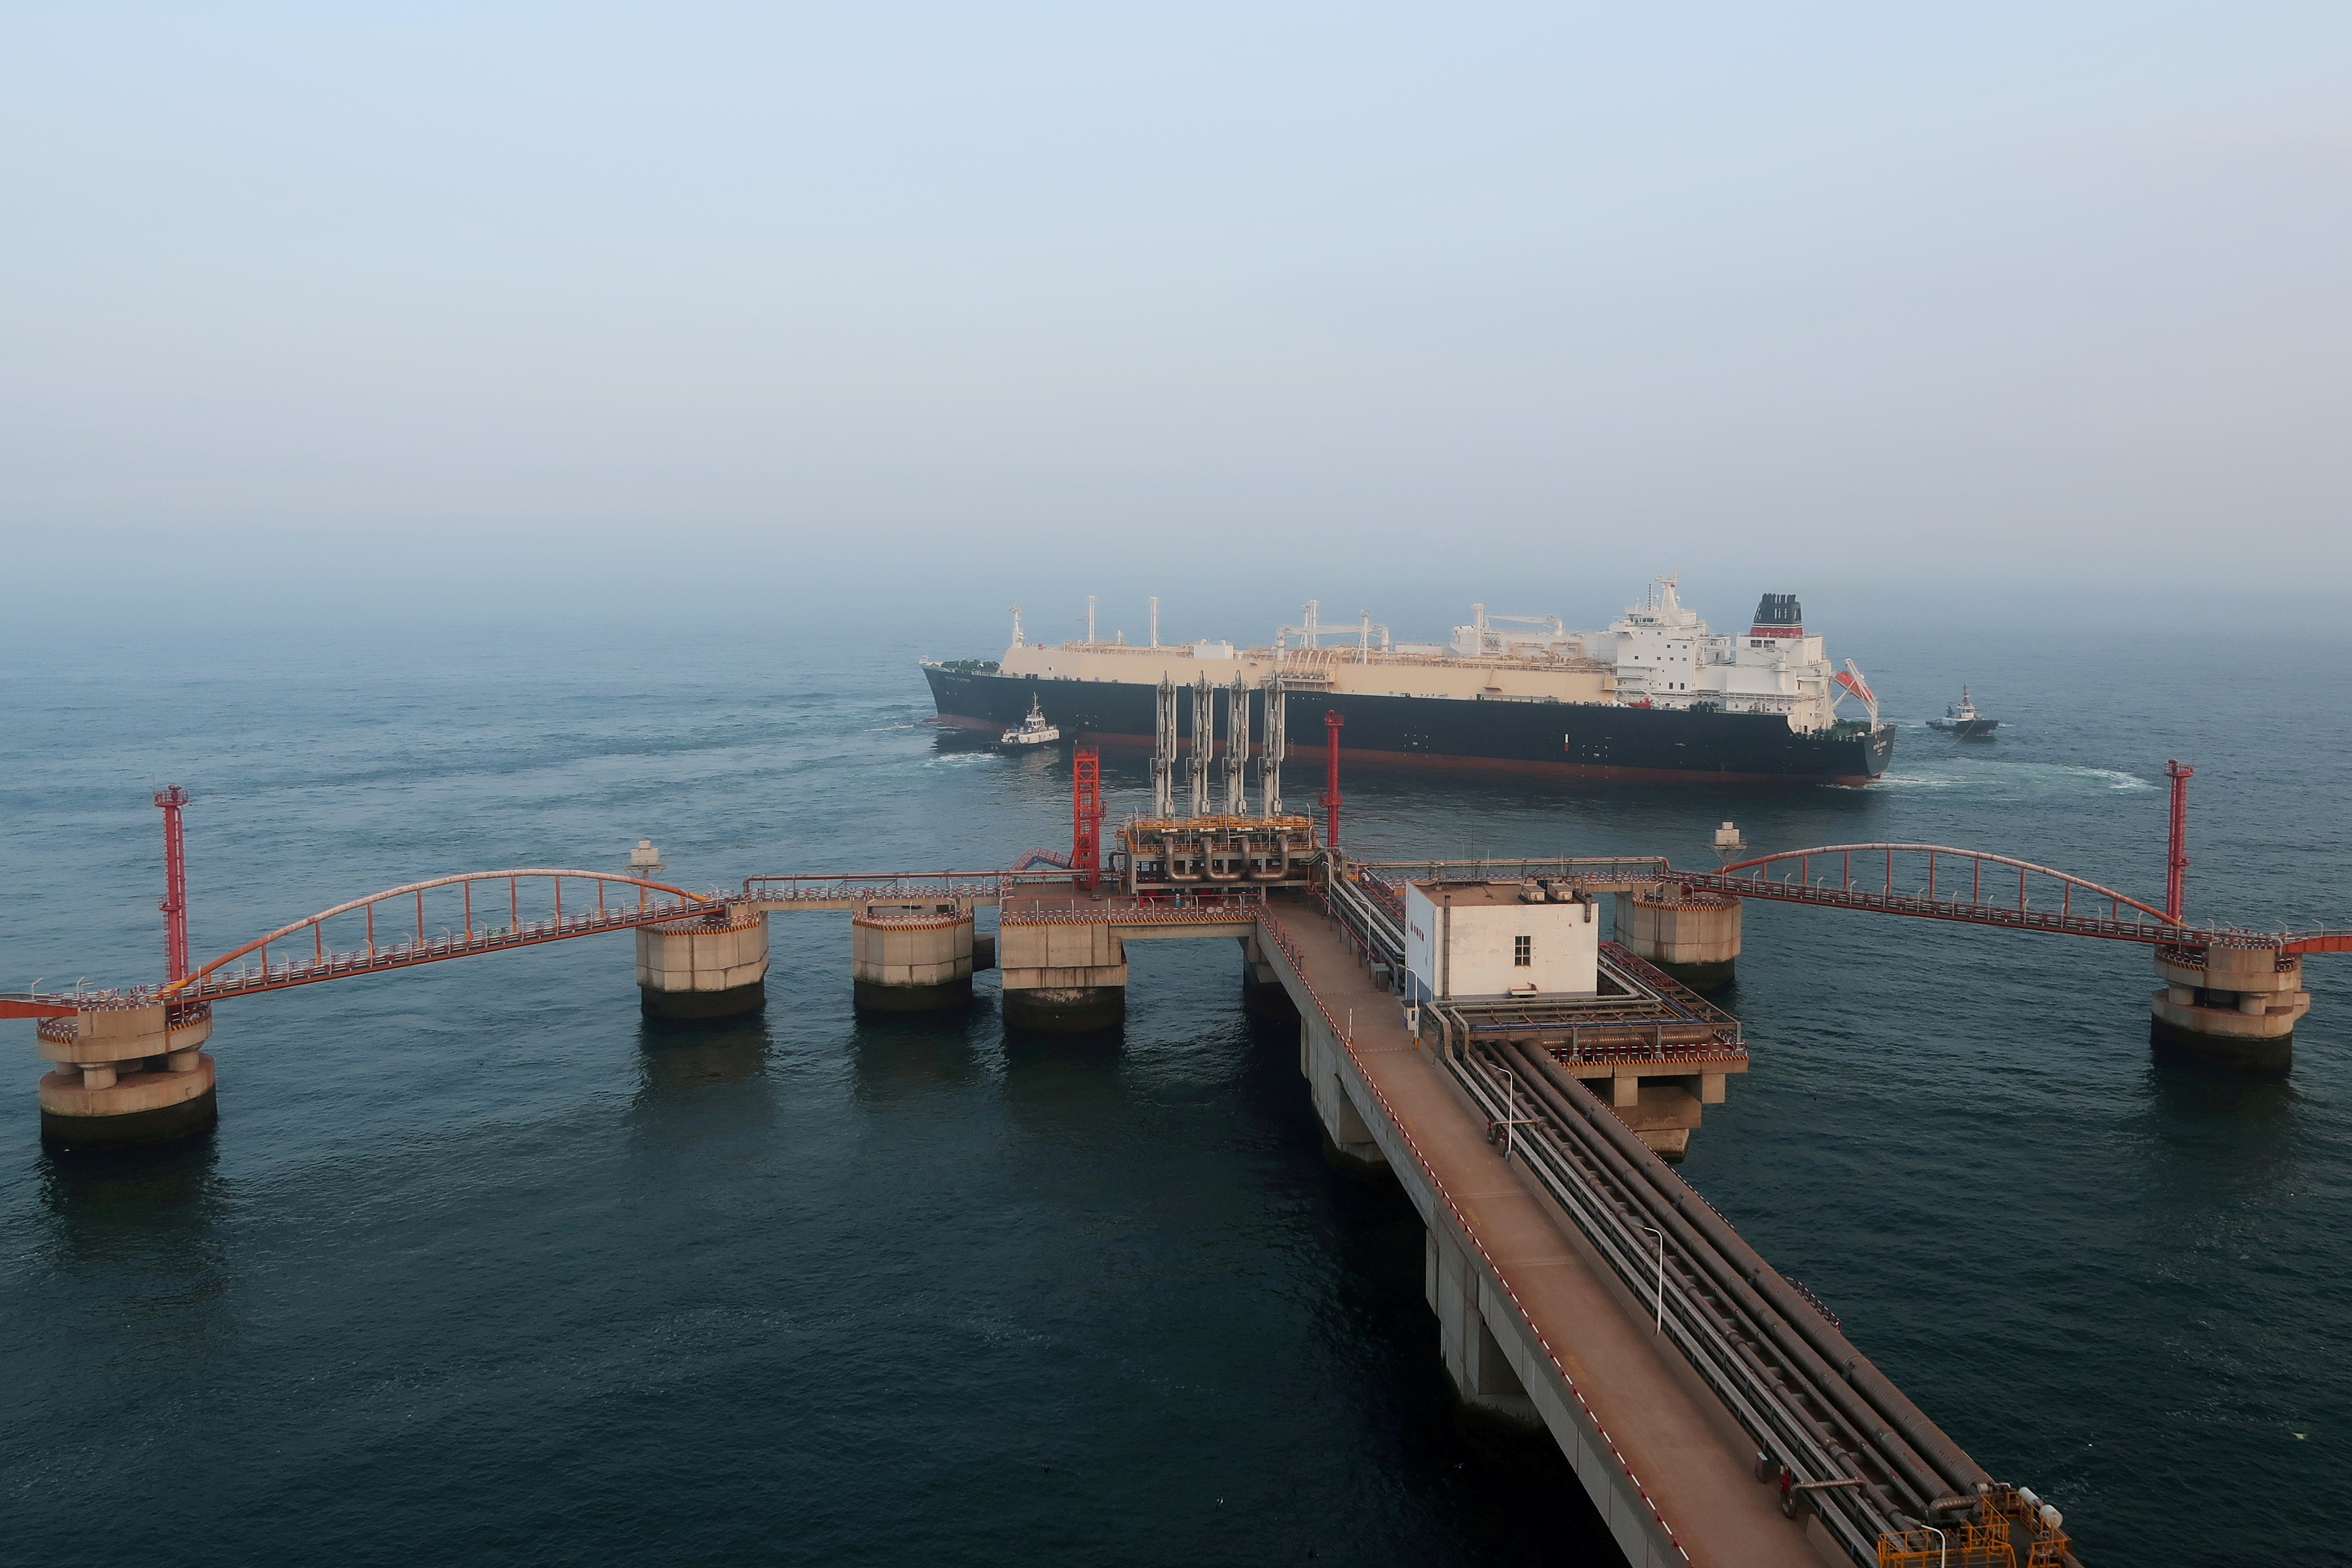 A liquified natural gas (LNG) tanker leaves the dock after discharge at PetroChina's receiving terminal in Dalian